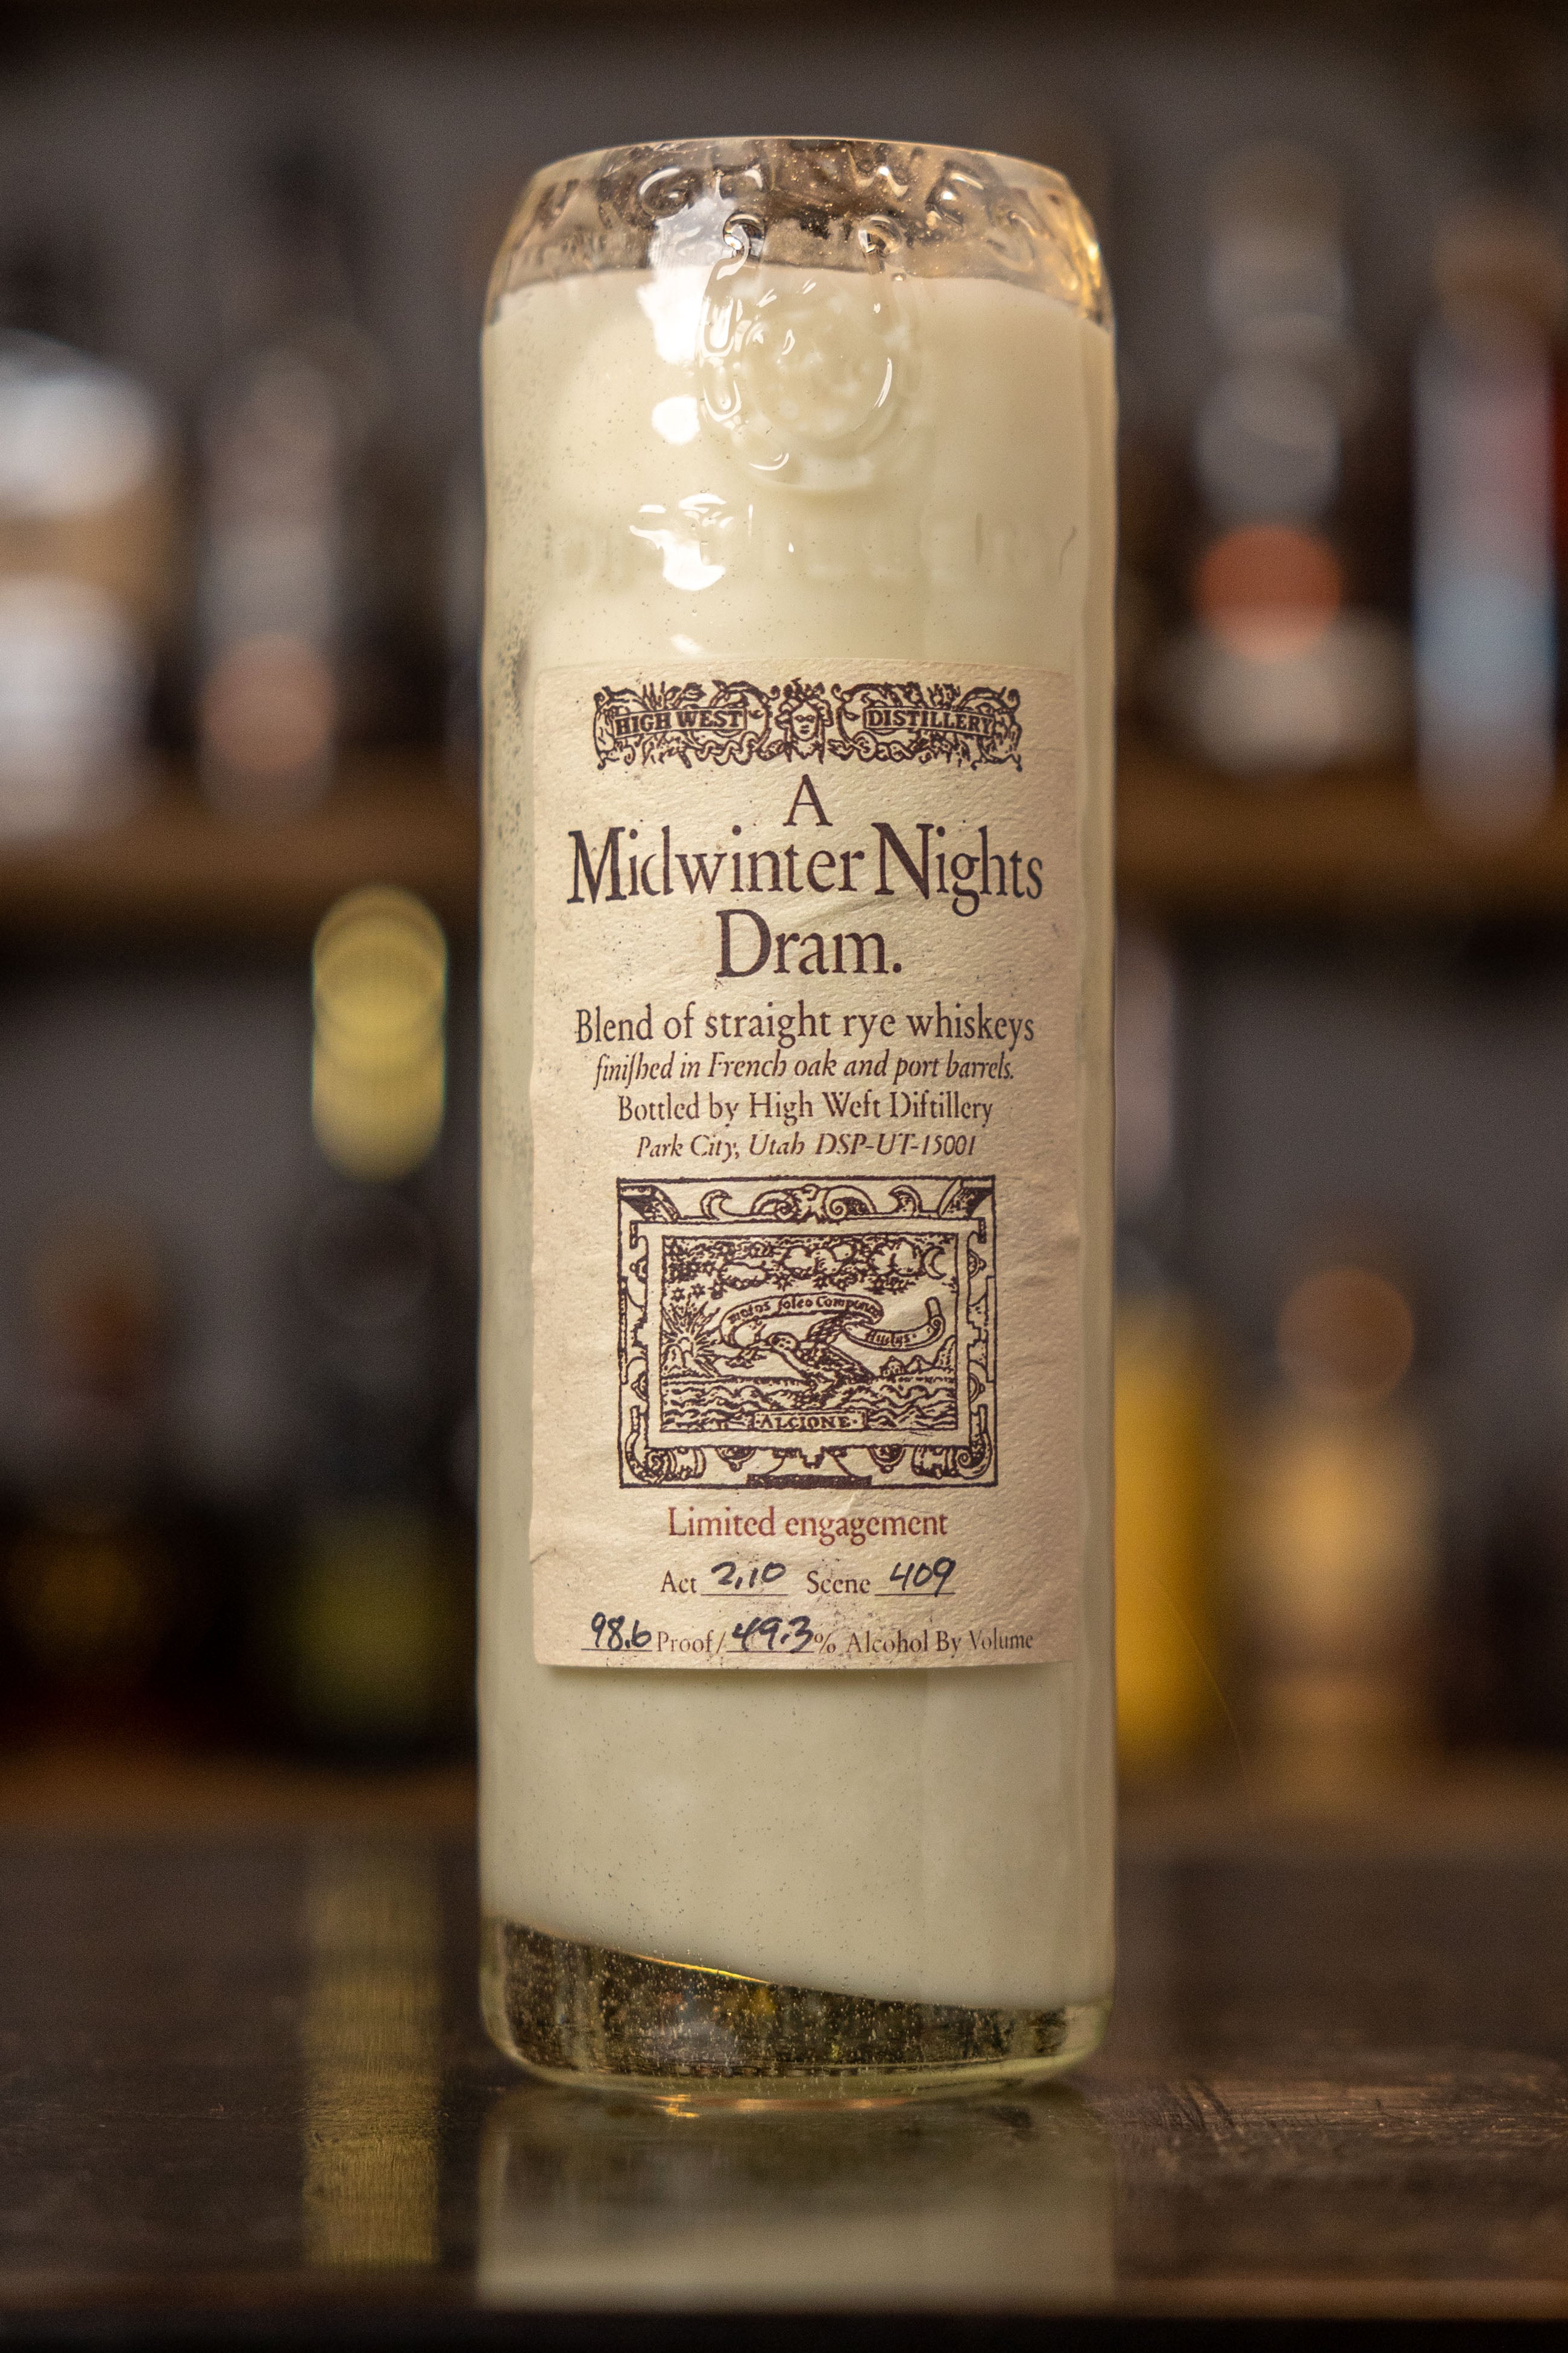 High West "A Midwinter Night's Dram" Bottle Candle